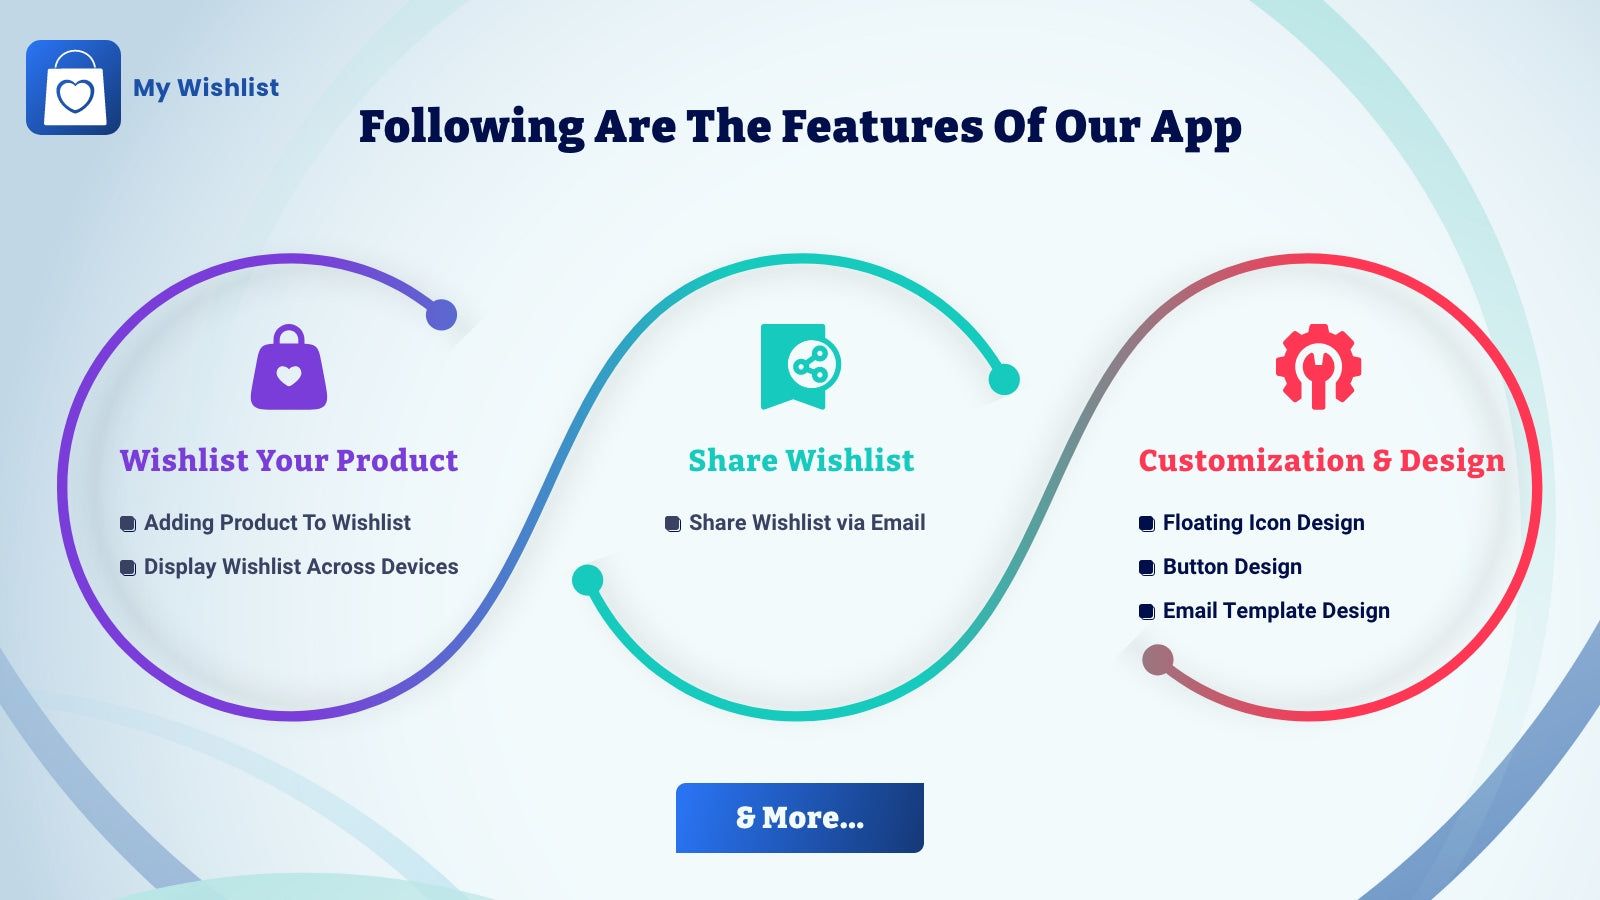 Features of our app